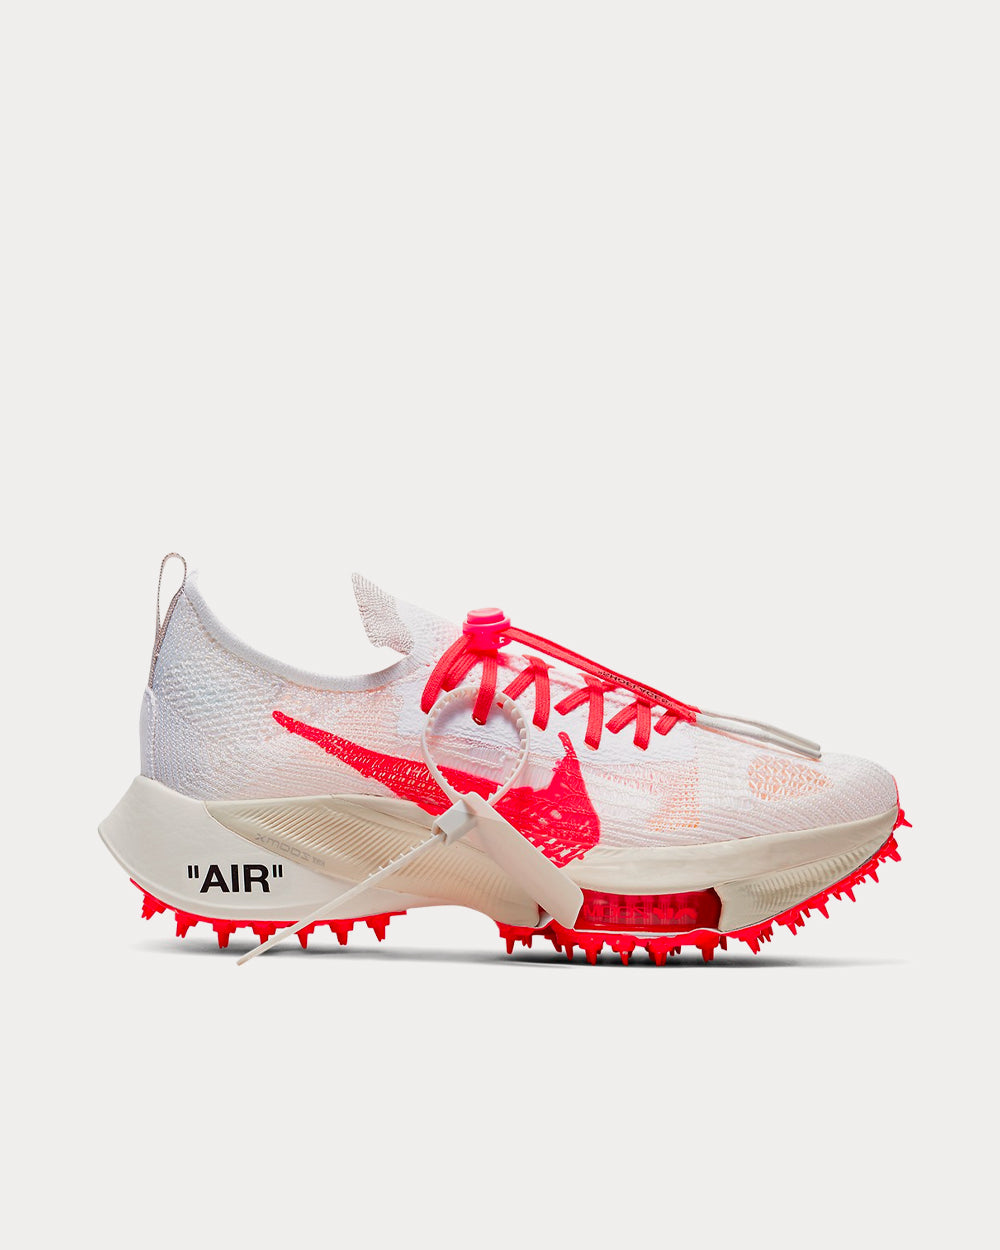 Nike x Off-White Air Zoom Tempo NEXT% White / Solar Red Low Top